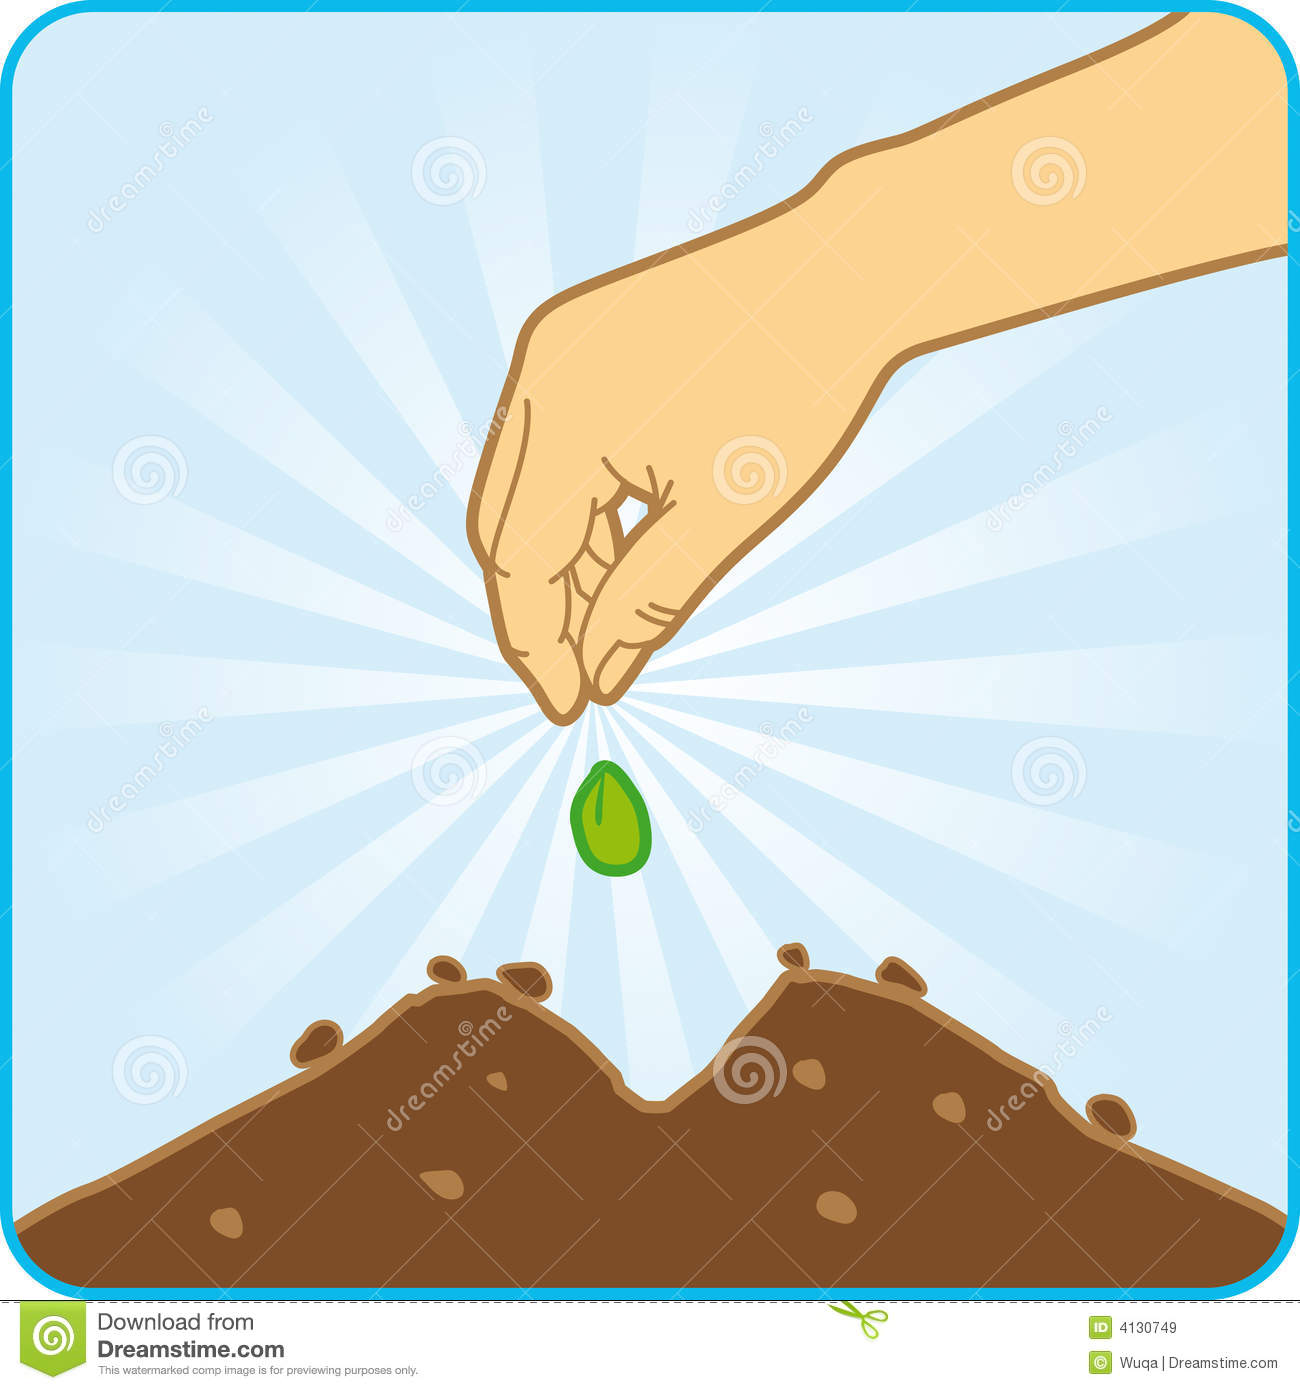 Plant Seeds Clipart The Palm Throwing In Seeds To